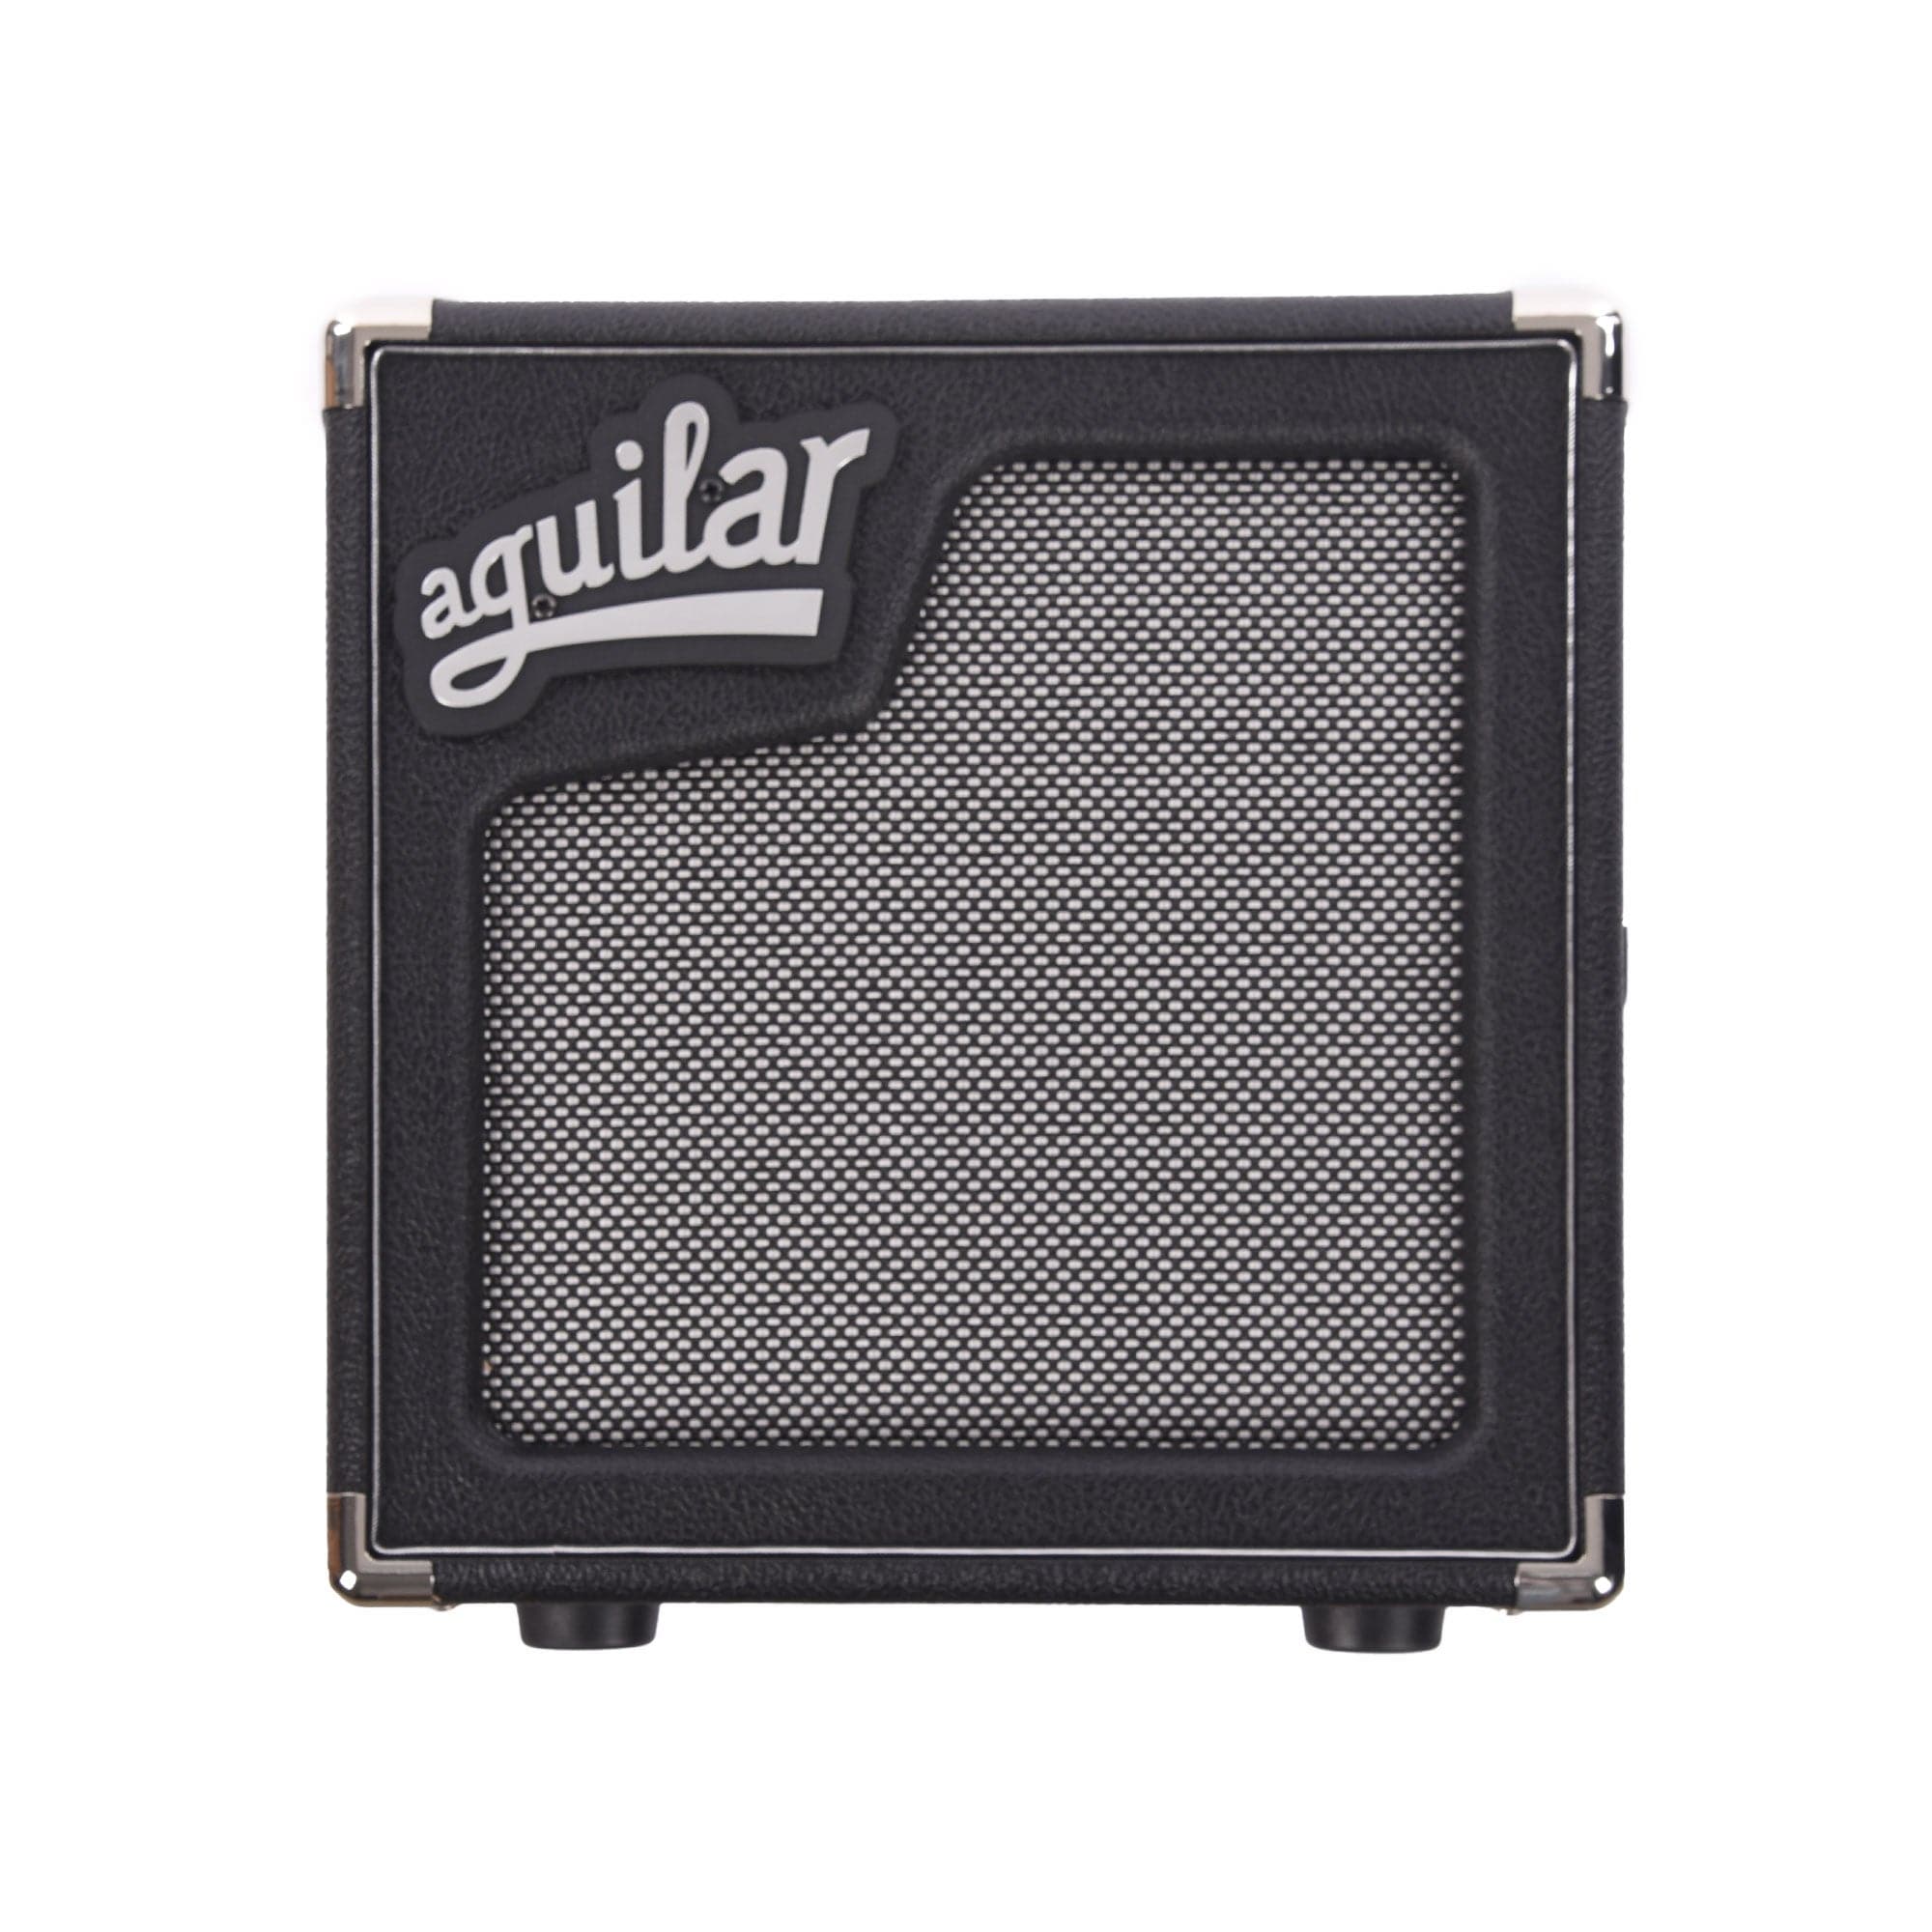 Aguilar SL1108 1x10 Lightweight 8-ohm Bass Cabinet Classic Black Amps / Bass Cabinets